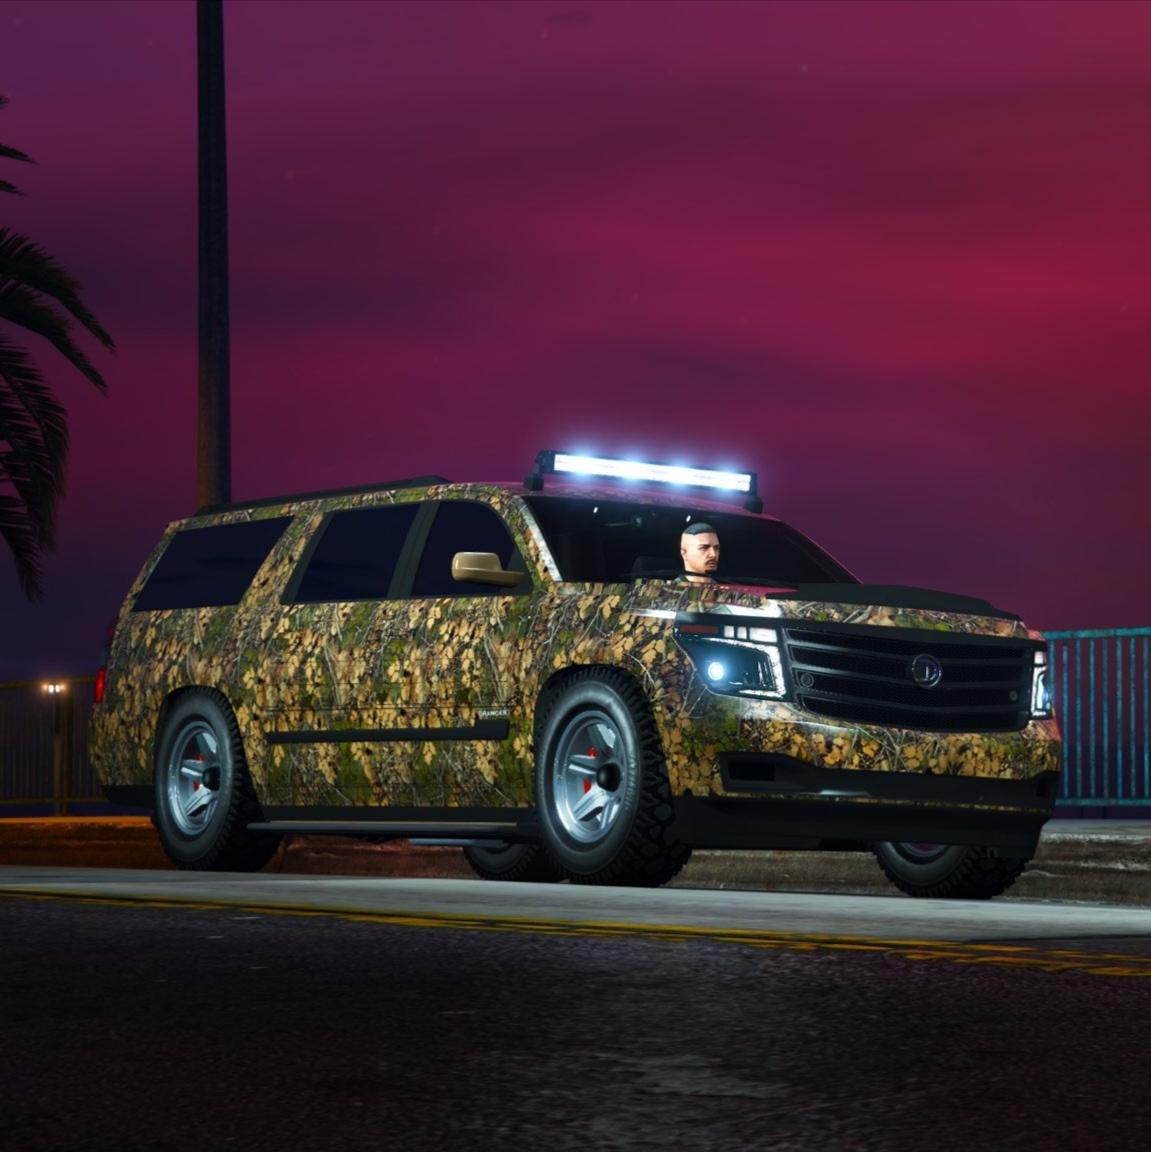 Granger 3600LX Now Available in GTA Online, Double Rewards on "Don't Fuck With Dre" VIP Contract & more